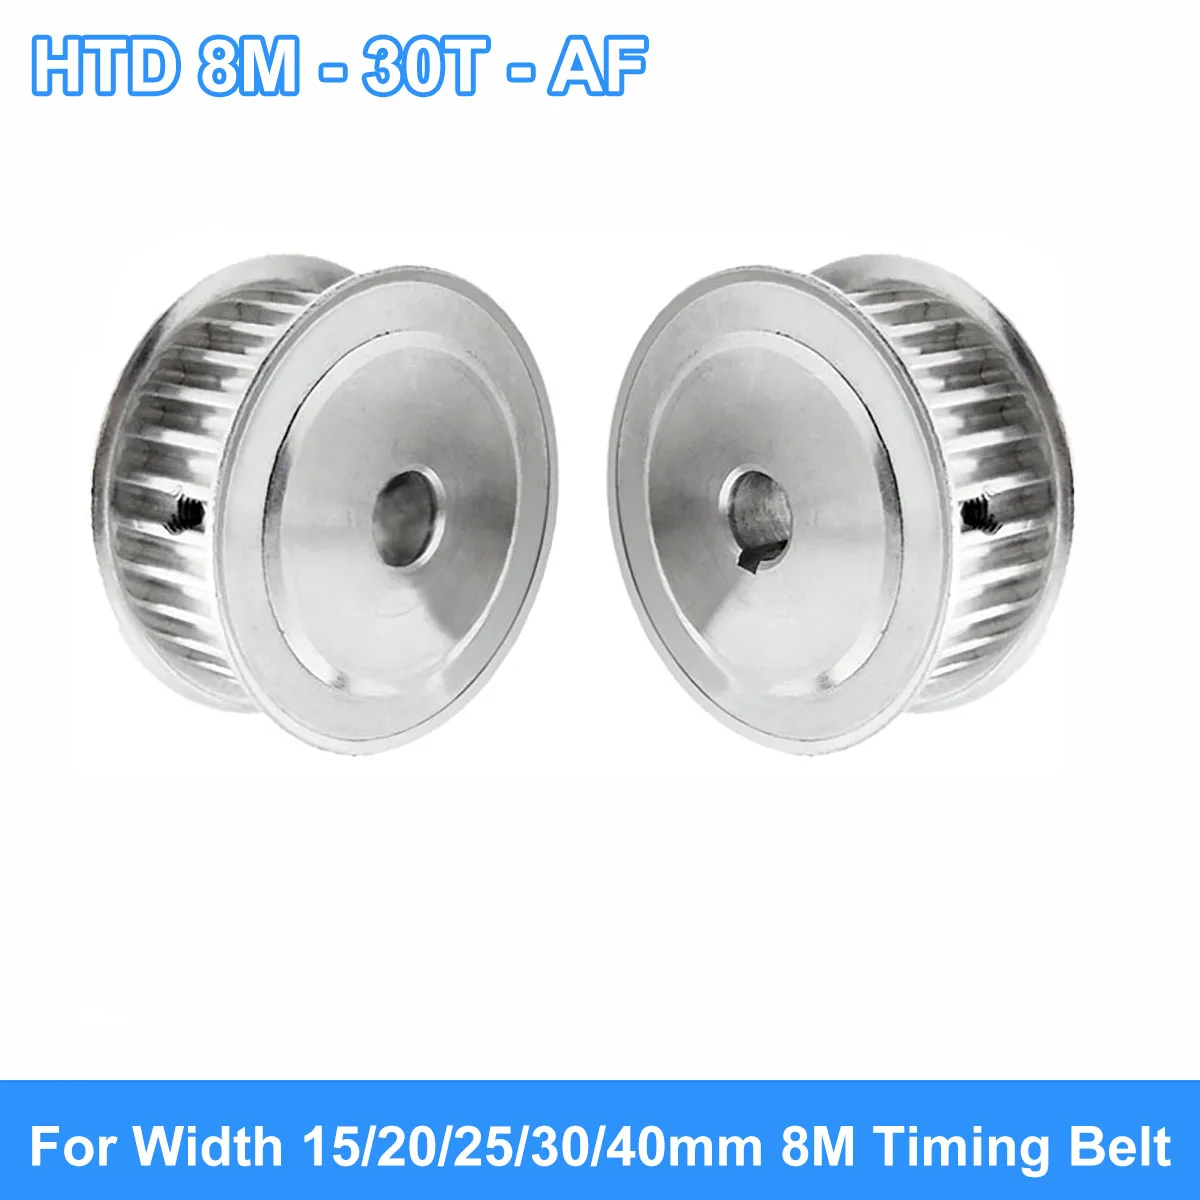 

HTD 8M 30Tooth Timing Pulley 8M-30T AF Synchronus Pulley Keyway Bore 8-38mm For Width 15/20/25/30/40mm 8M Timing Belt